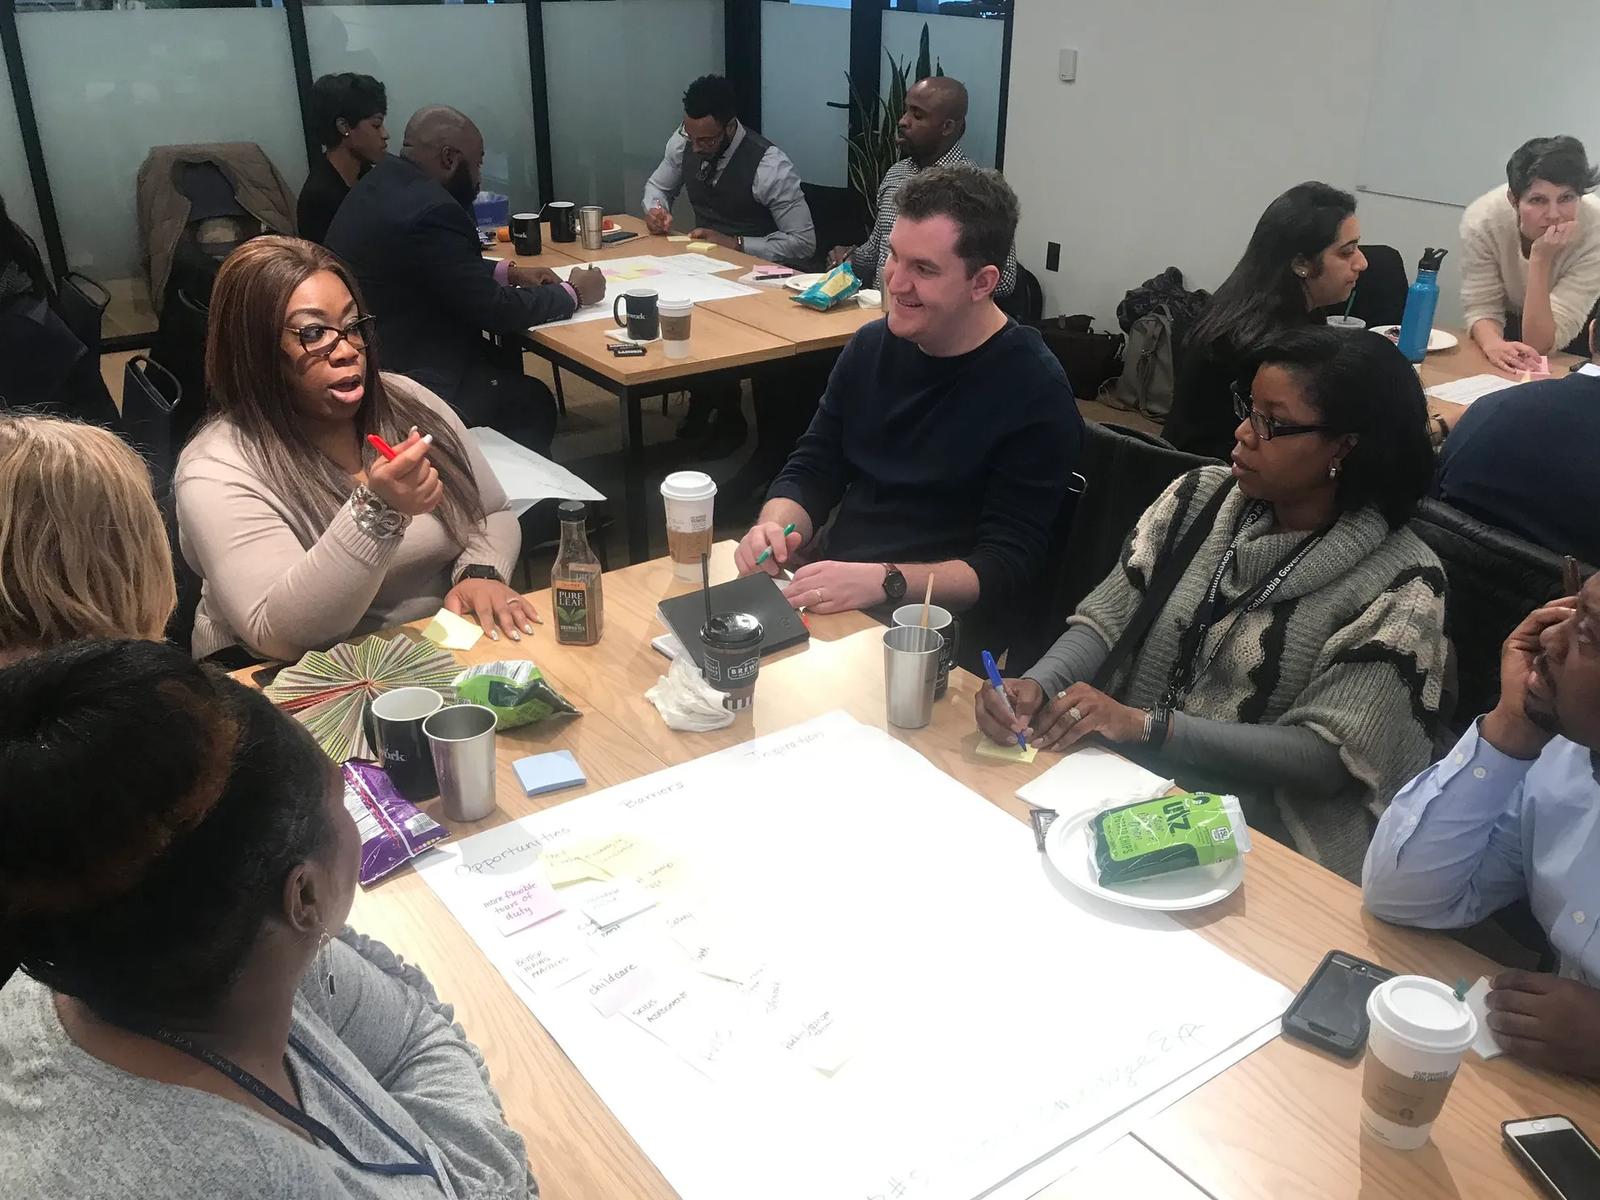 Enhancing DC Government Services through UX and Human-Centered Design